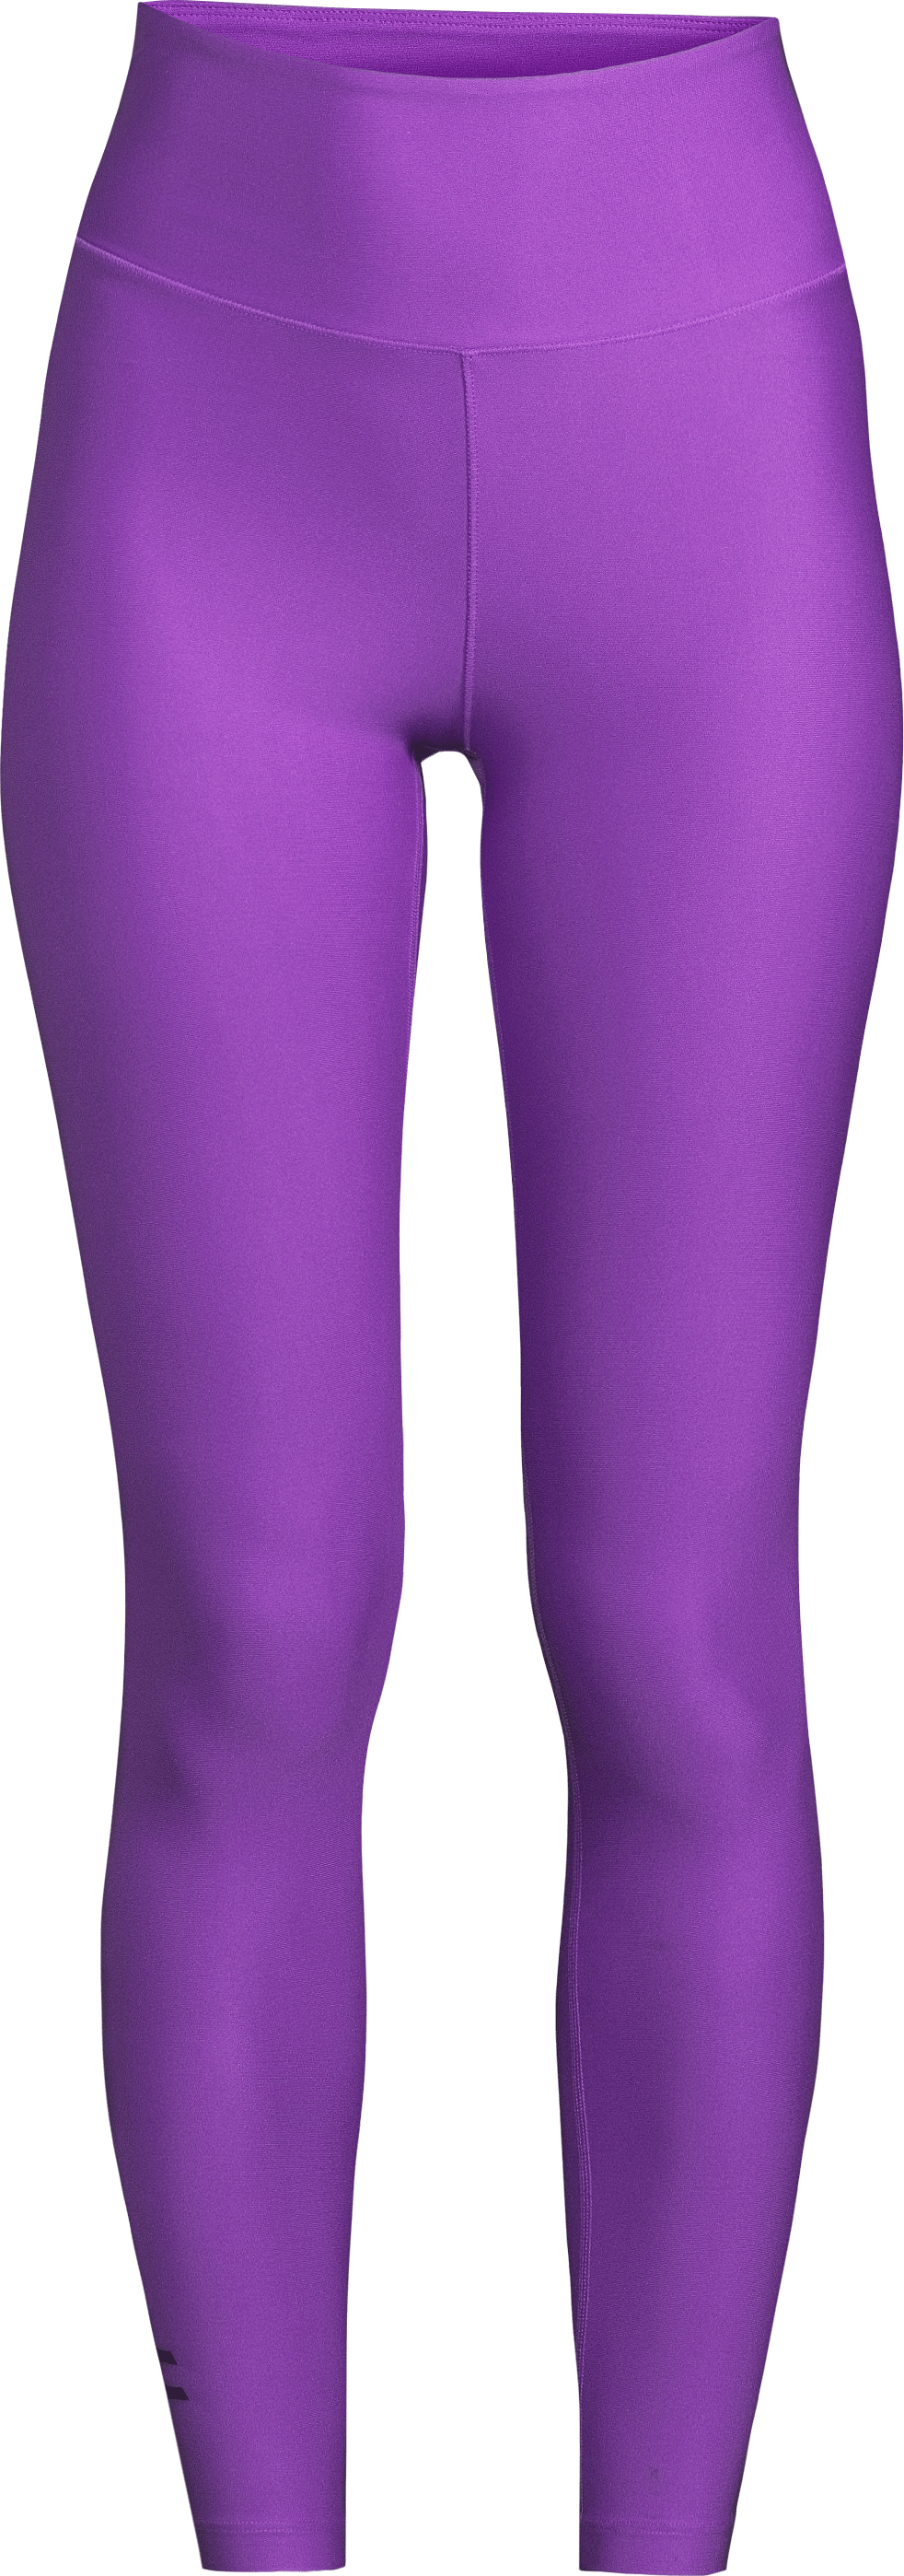 Women's Graphic Sport Tights Liberty Lilac